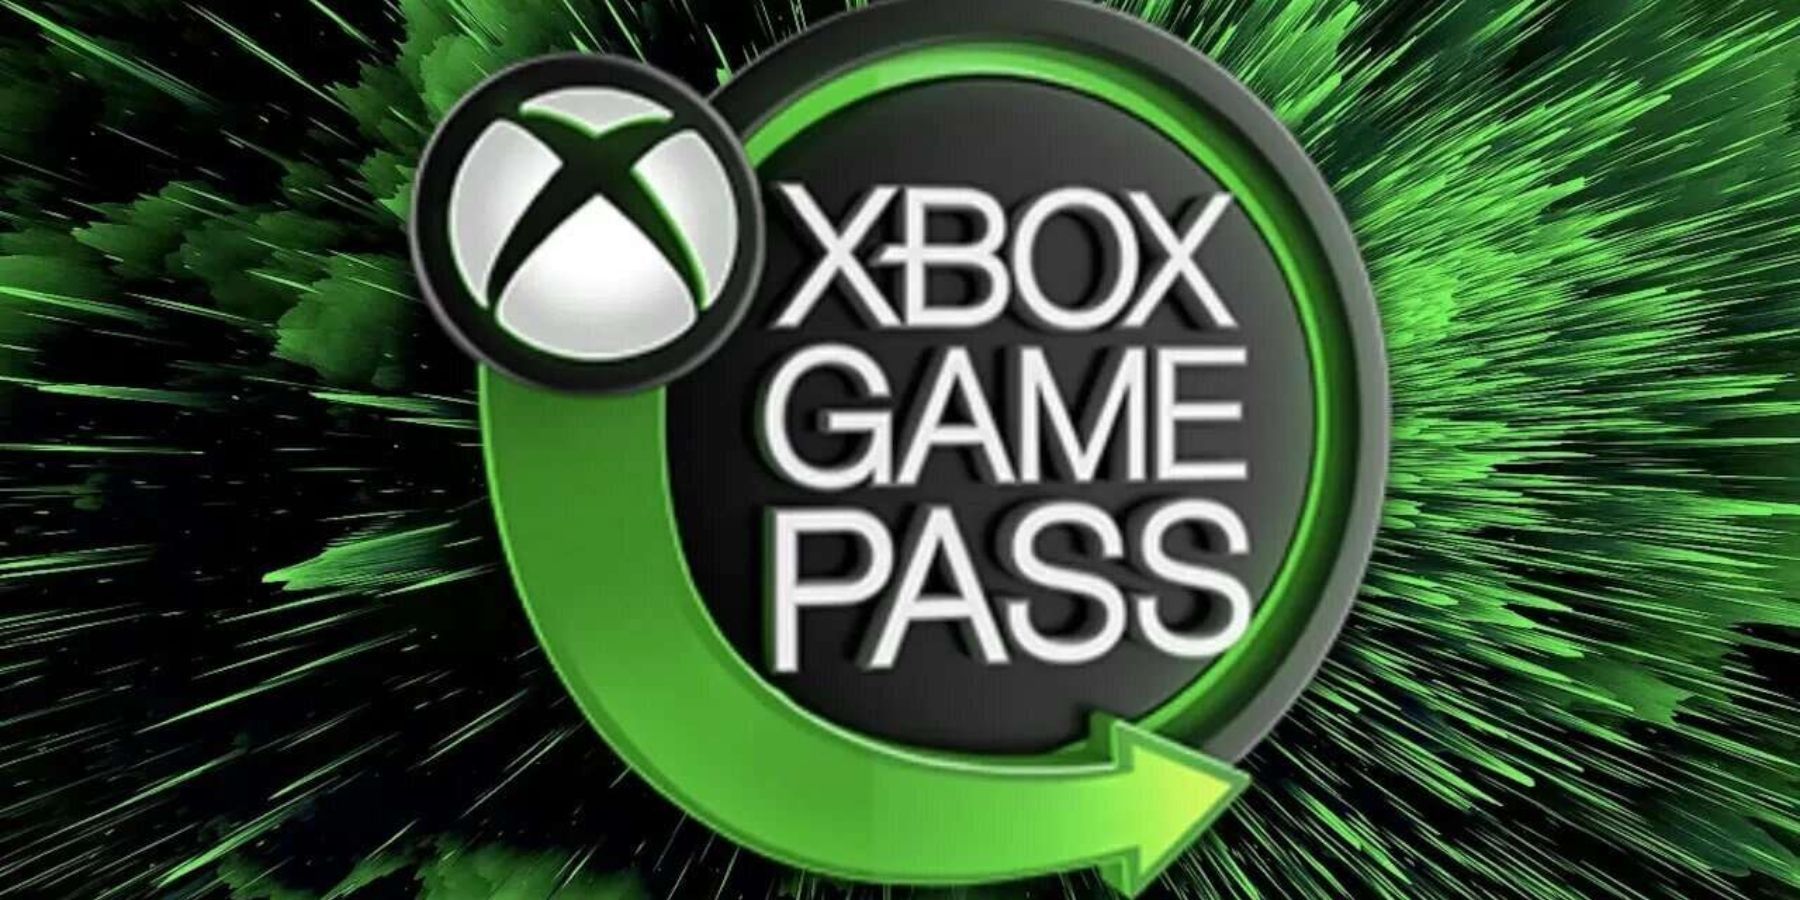 Xbox Game Pass prices go up starting in July - Polygon